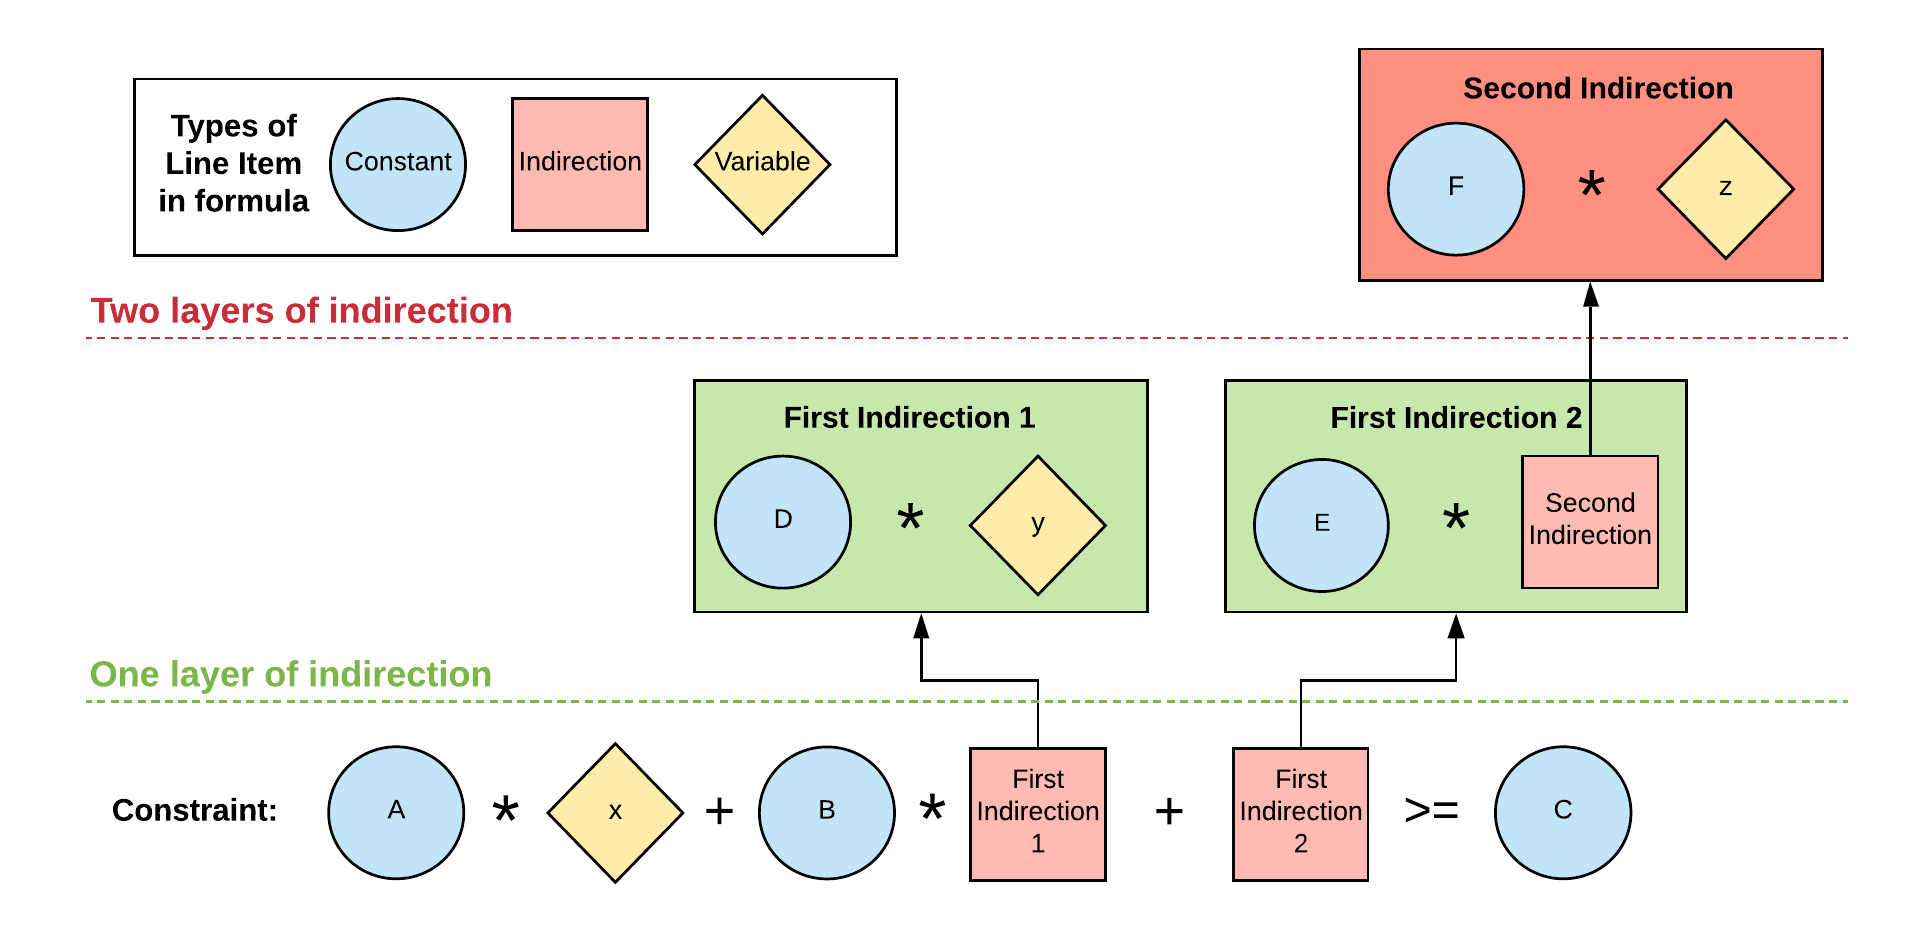 Chart shows an example of a line item with two levels of indirection. A constraint formula refers to a line item that contains a formula, which itself makes reference to a line item containing a variable. This final line item has two levels of indirection.